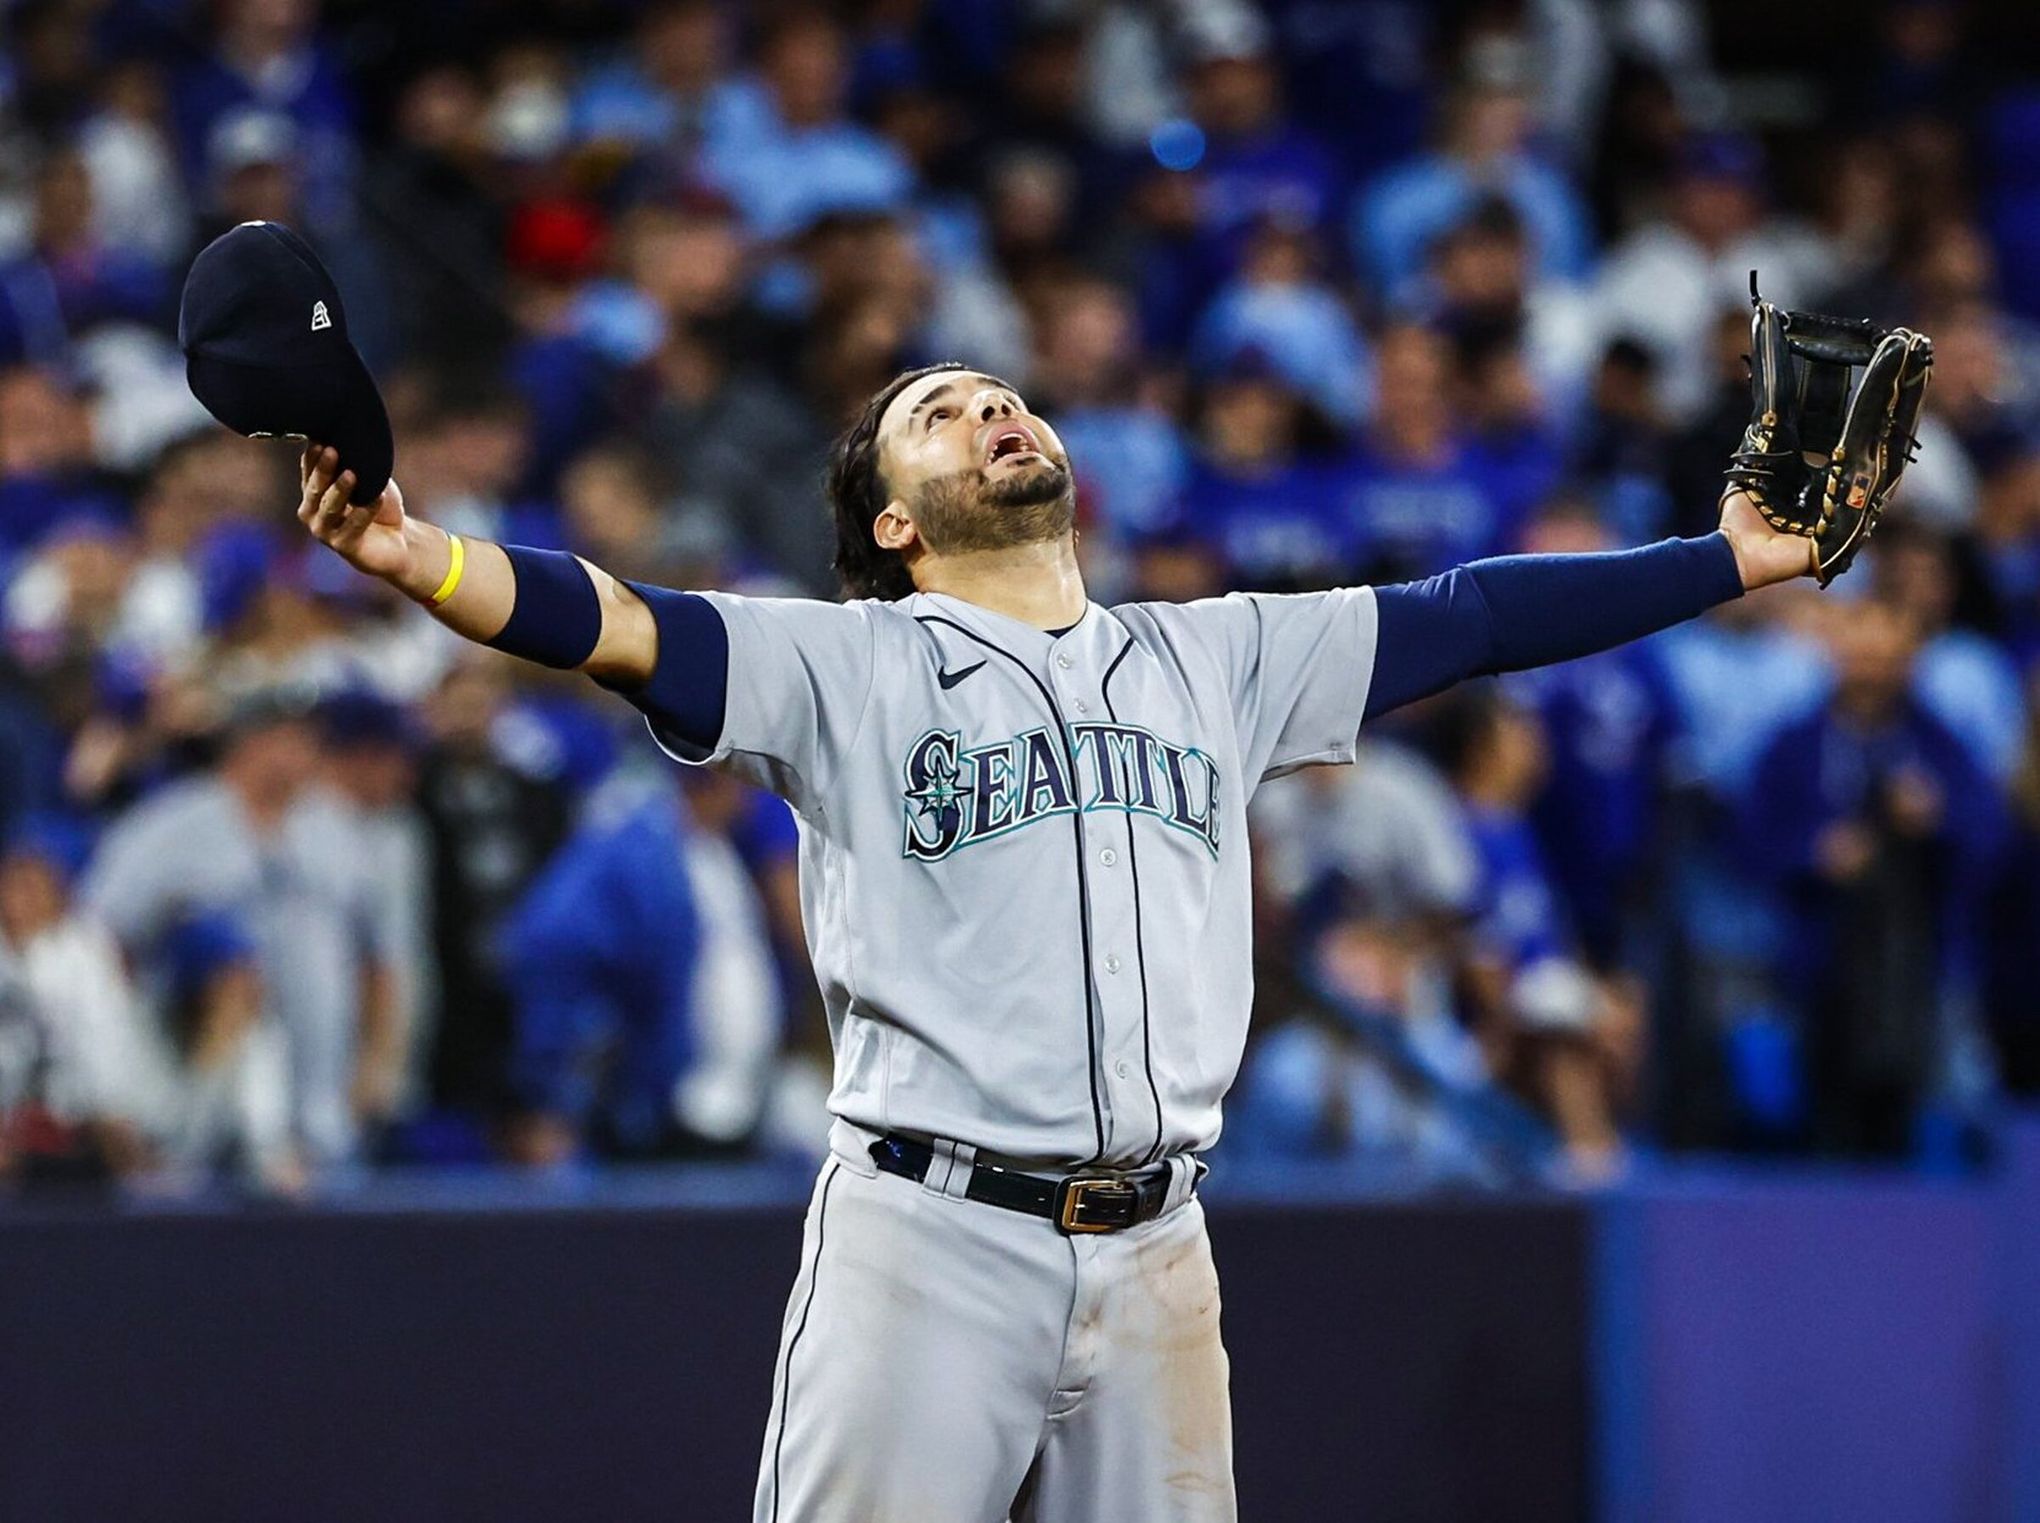 Mariners-Astros GameCenter: Live updates, highlights, how to watch